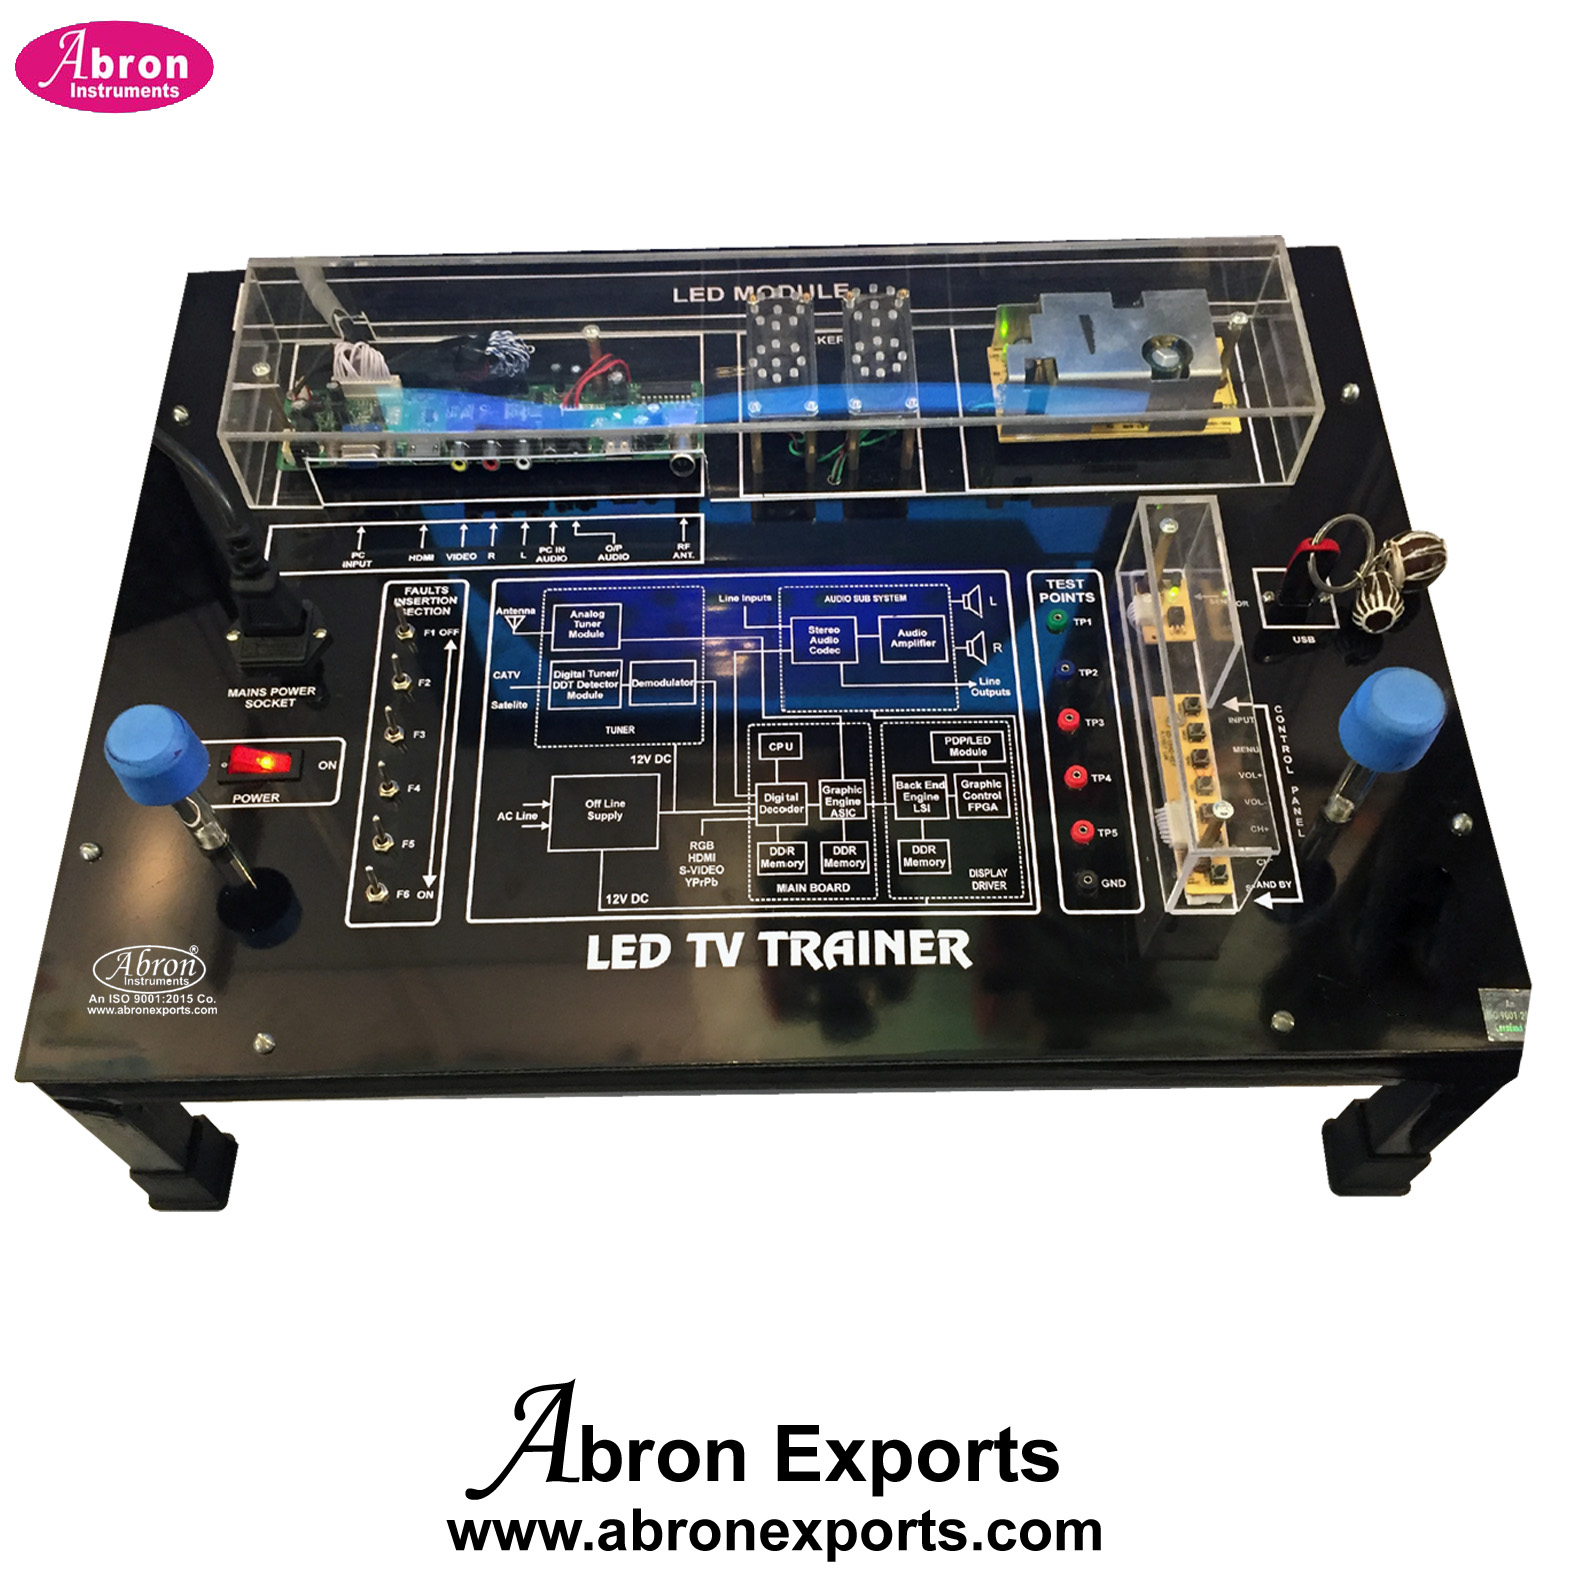 Demonstration TV LED Trainer Bench Circuit Board Abron AE-1240B 